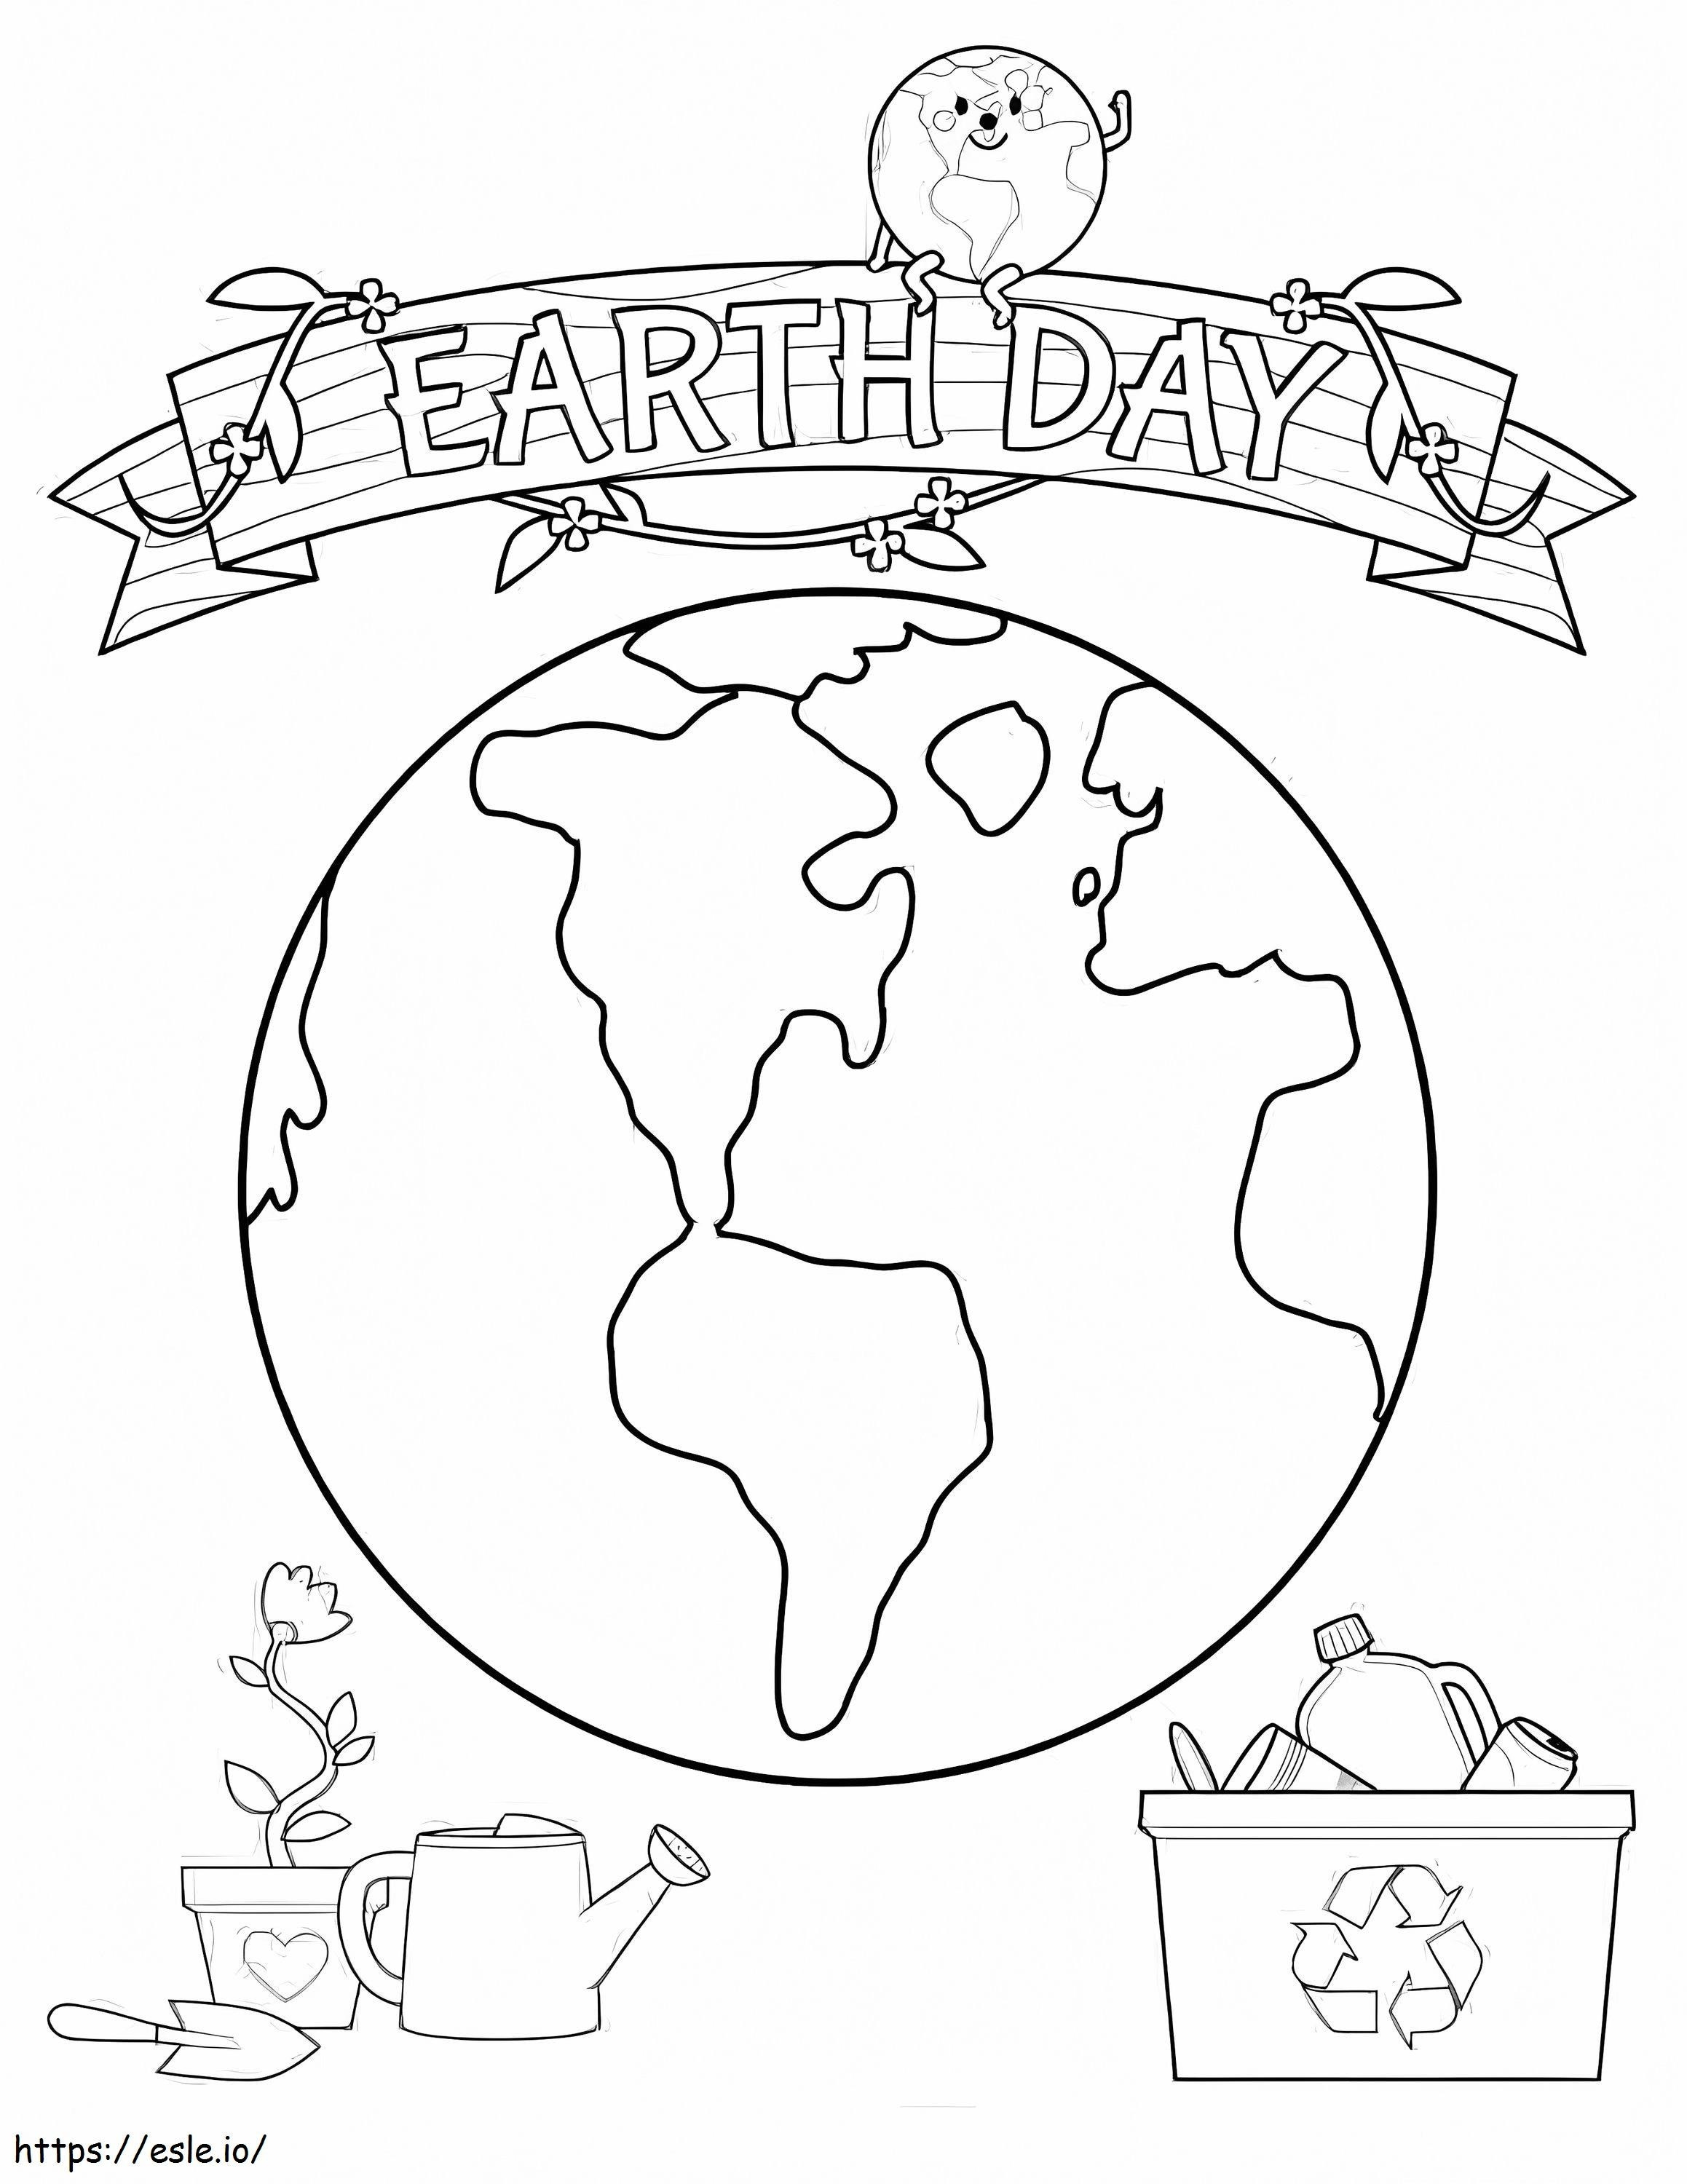 Happy Earth Day 6 coloring page